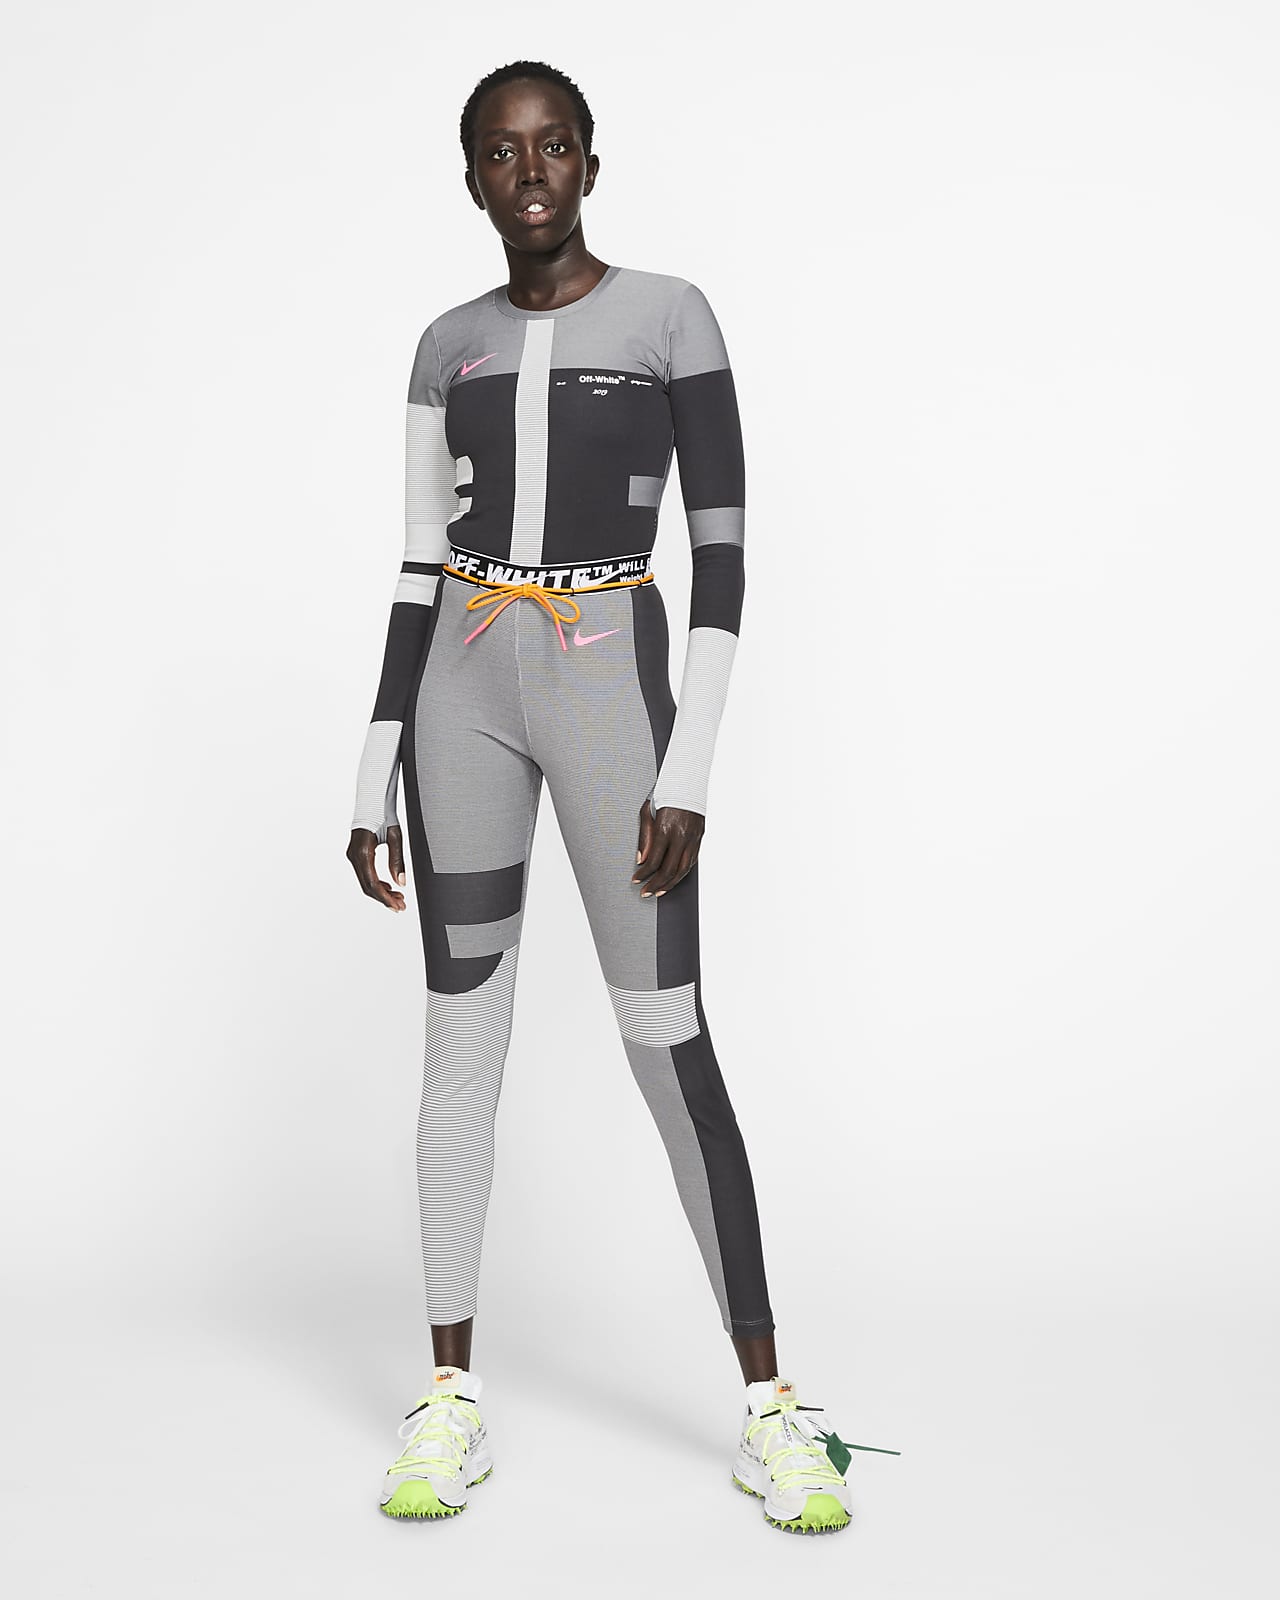 https://static.nike.com/a/images/t_PDP_1280_v1/f_auto,q_auto:eco/ztbe3le99zaplcb0cnyn/off-white%E2%84%A2-womens-high-waisted-7-8-running-leggings-HHm6wd.png